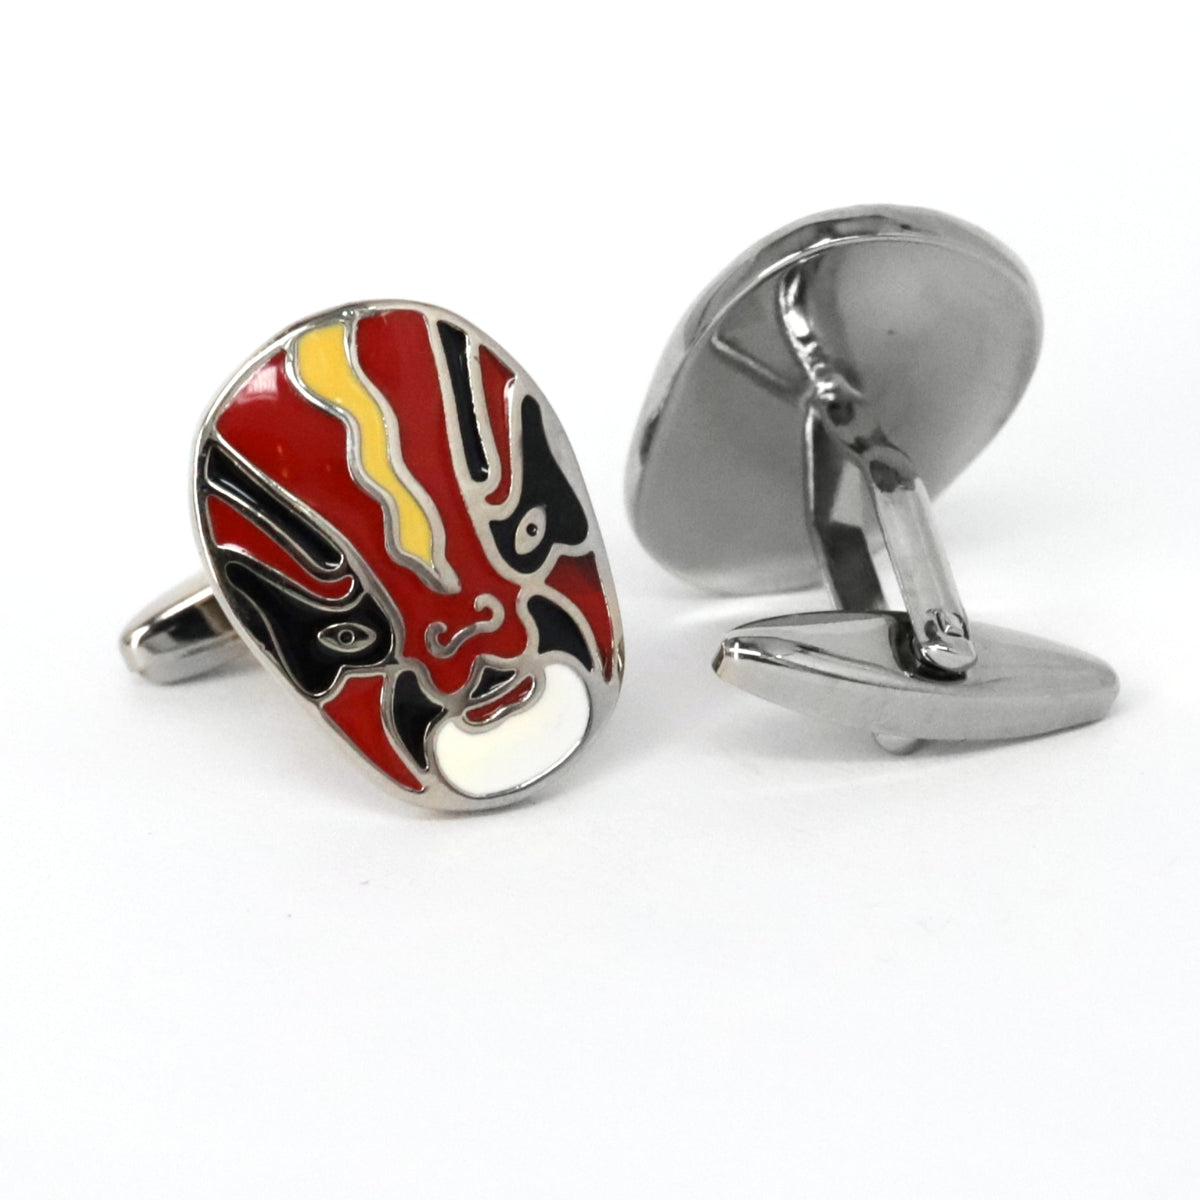 Jing Mask or Chinese Opera mask Black Yellow Cufflinks (Online Exclusive)